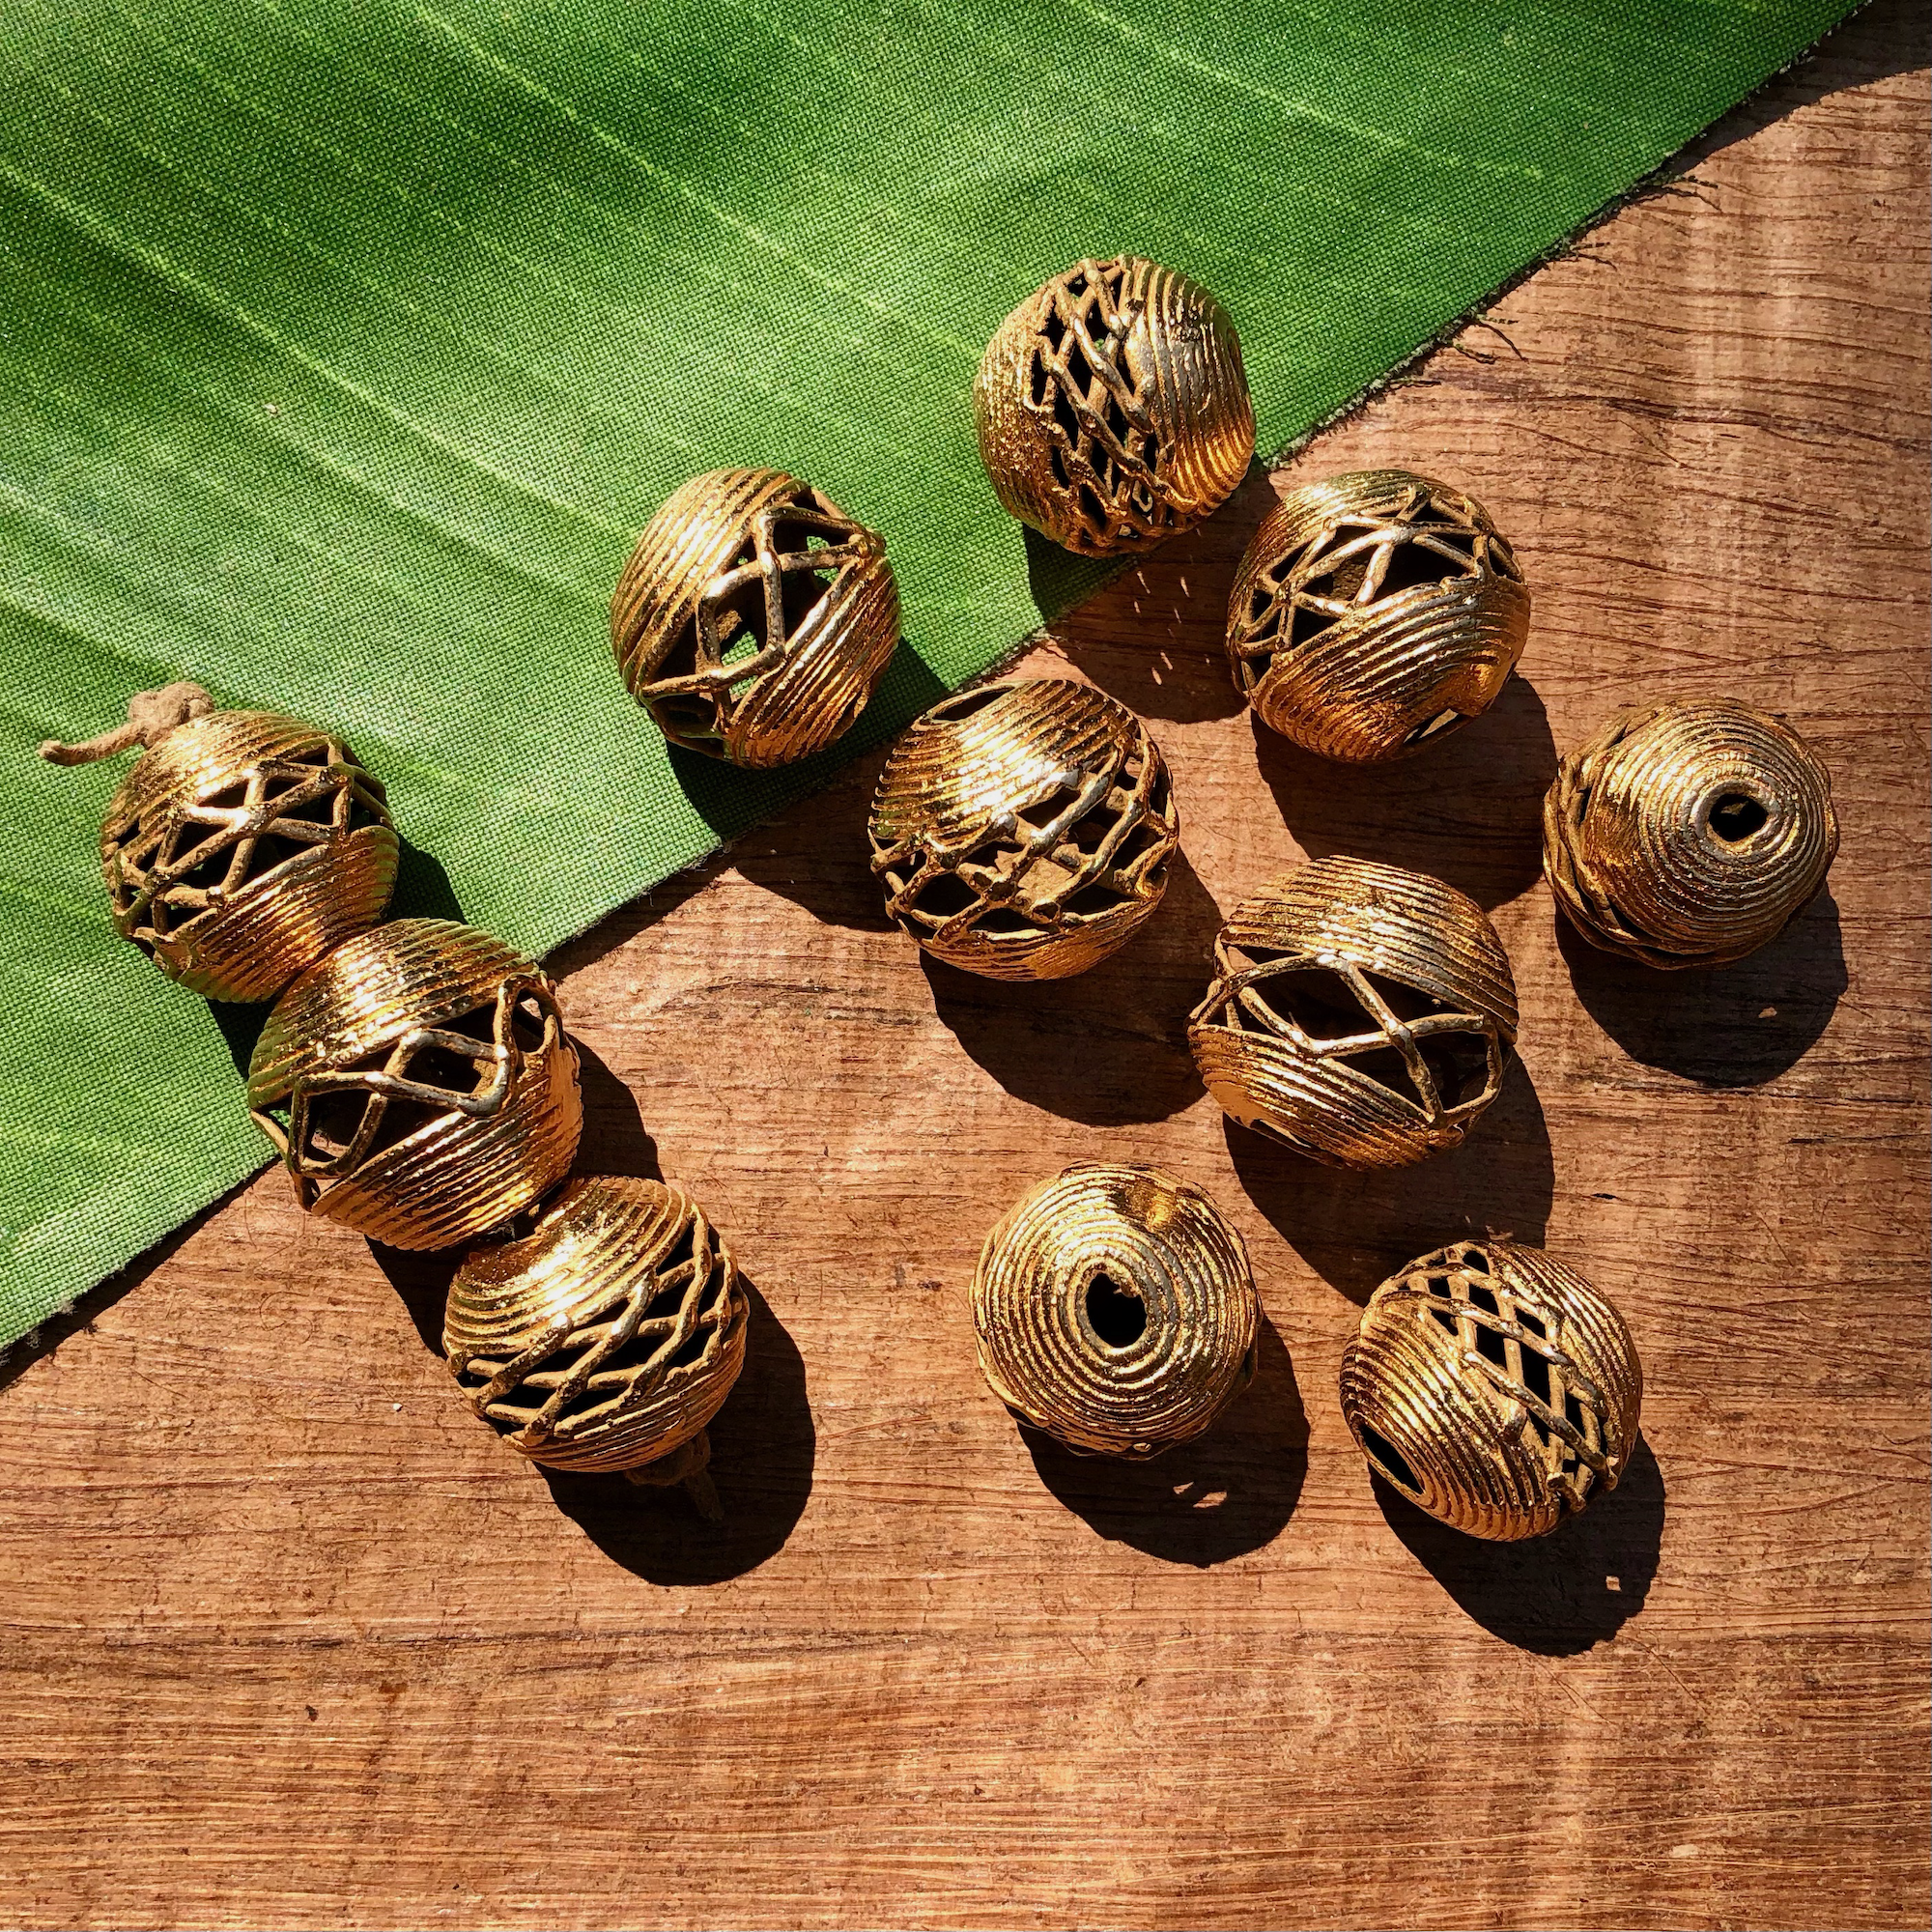 Gold Round African Beads - 3 Pieces